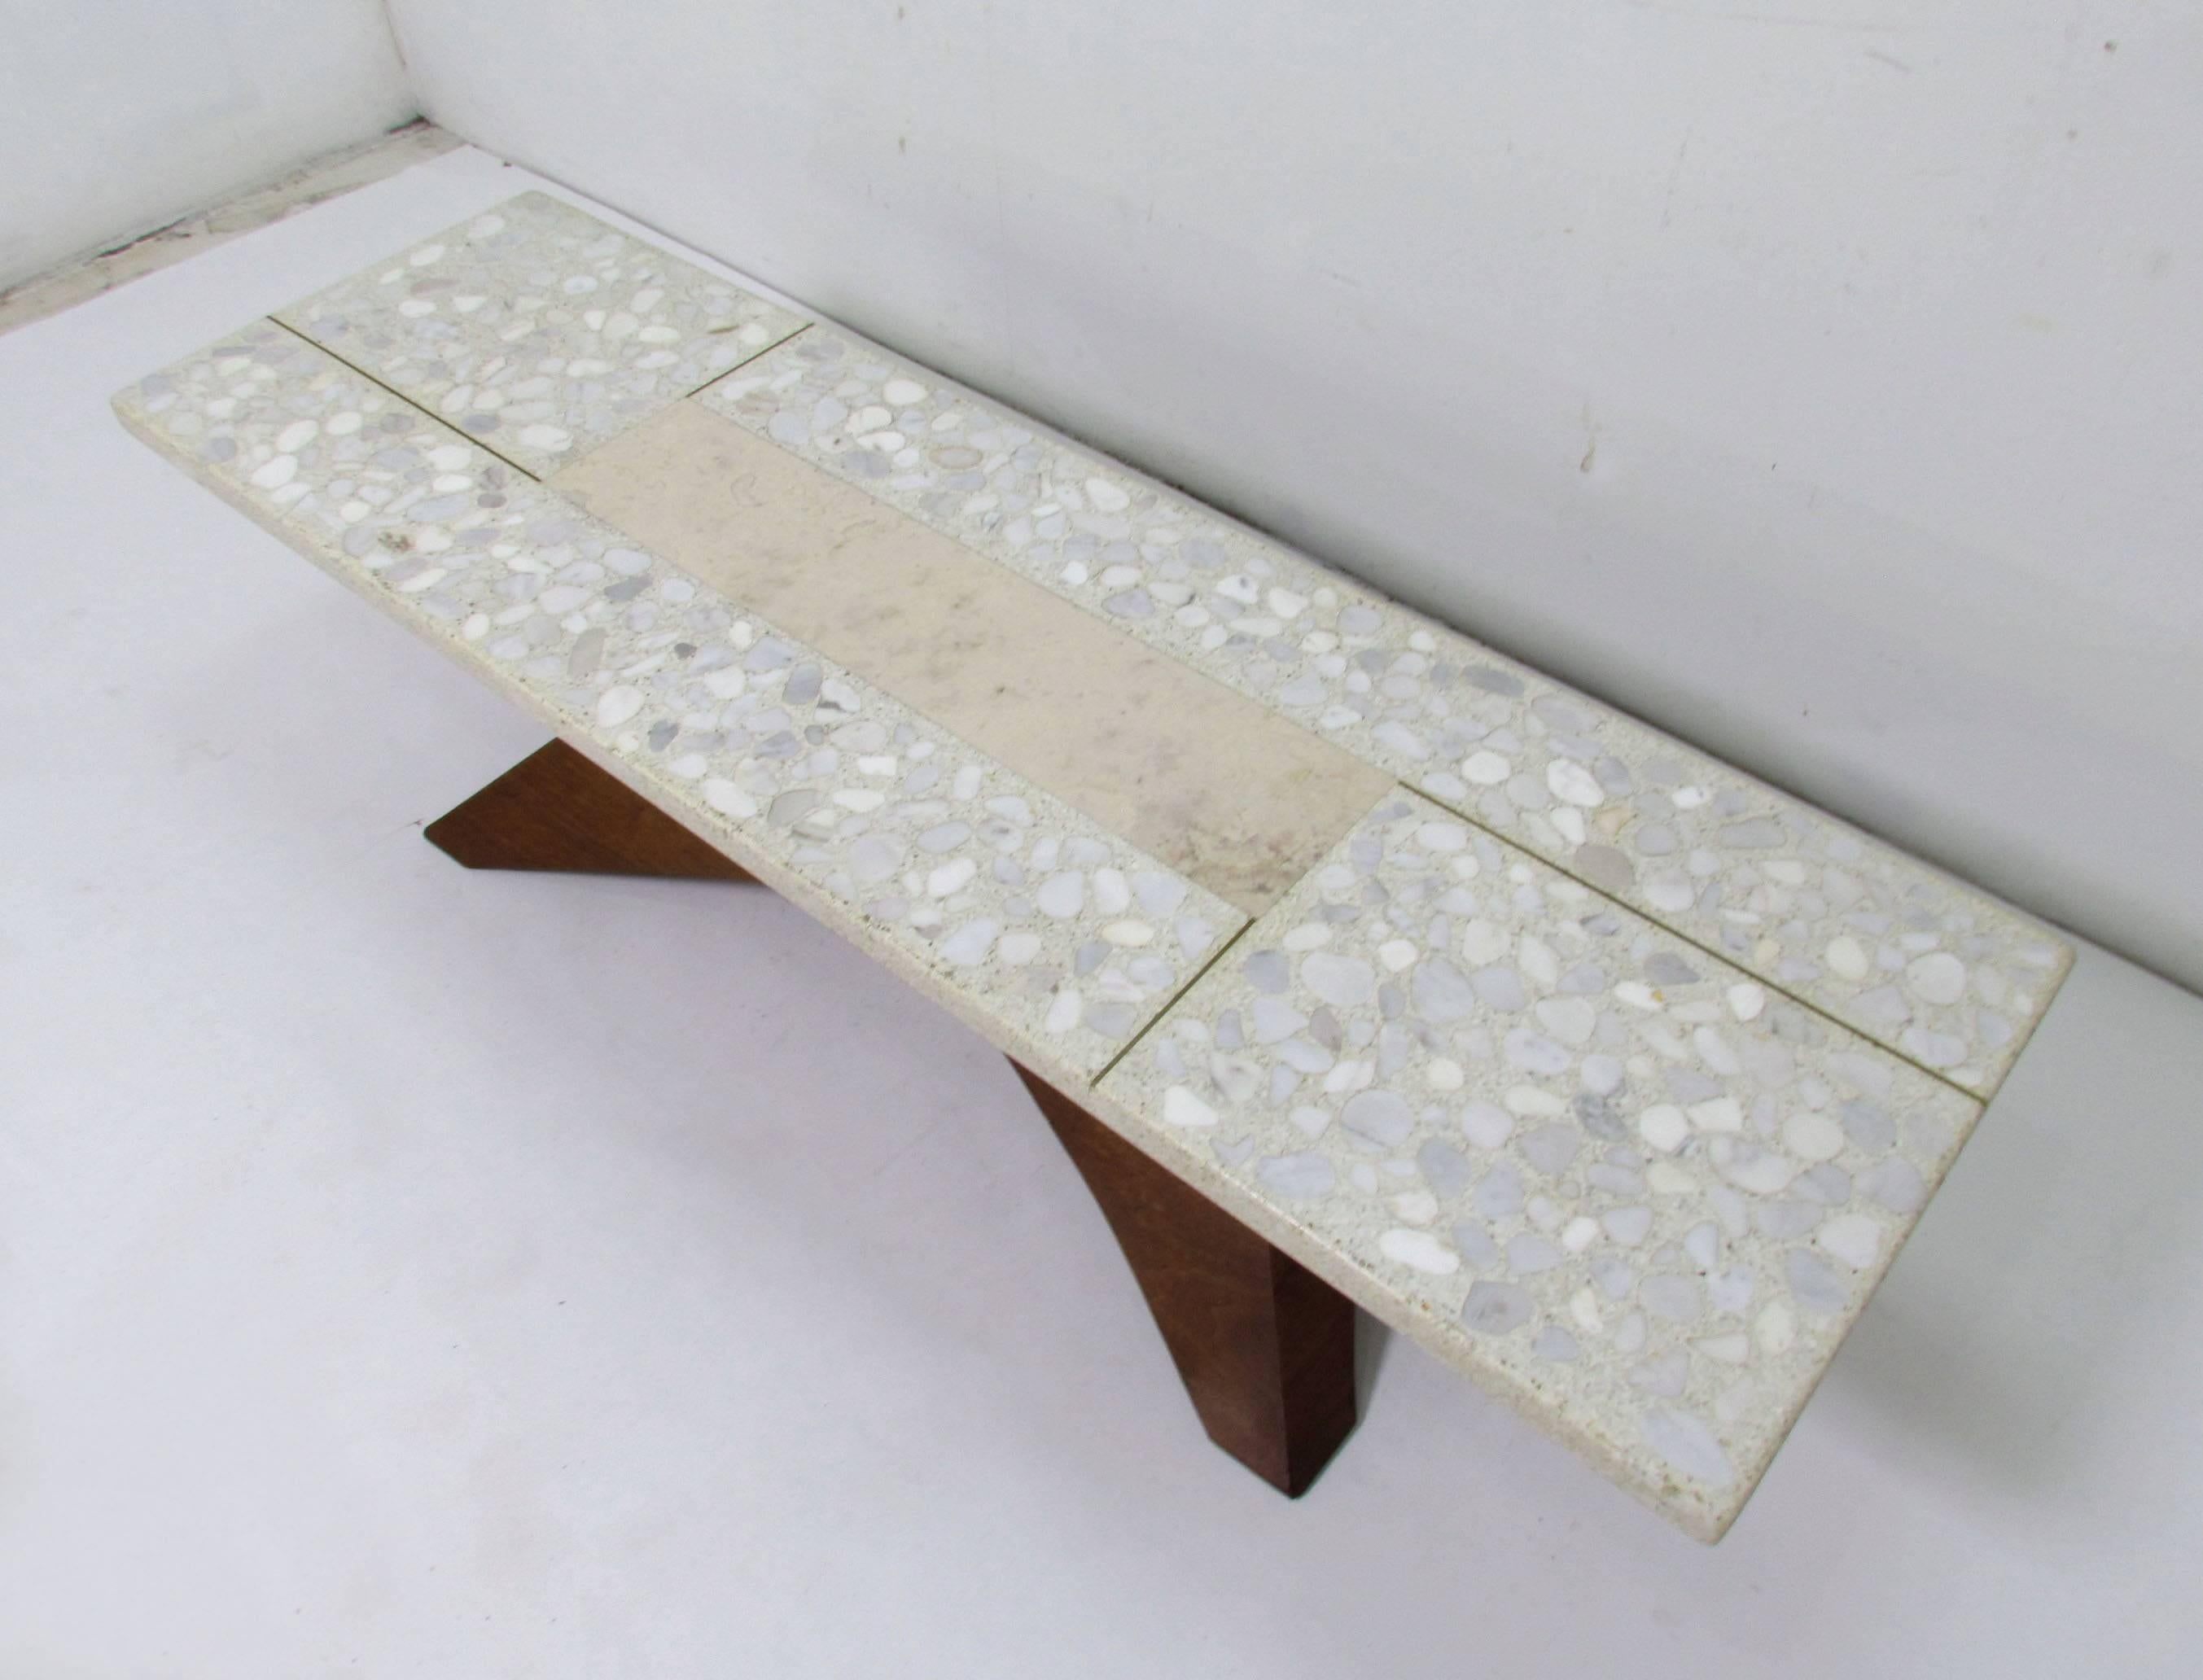 Unusual form coffee table in the manner of Harvey Probber, featuring a terrazzo stone top with marble centre and brass inlay over a sculptural carved walnut base with recessed casters.